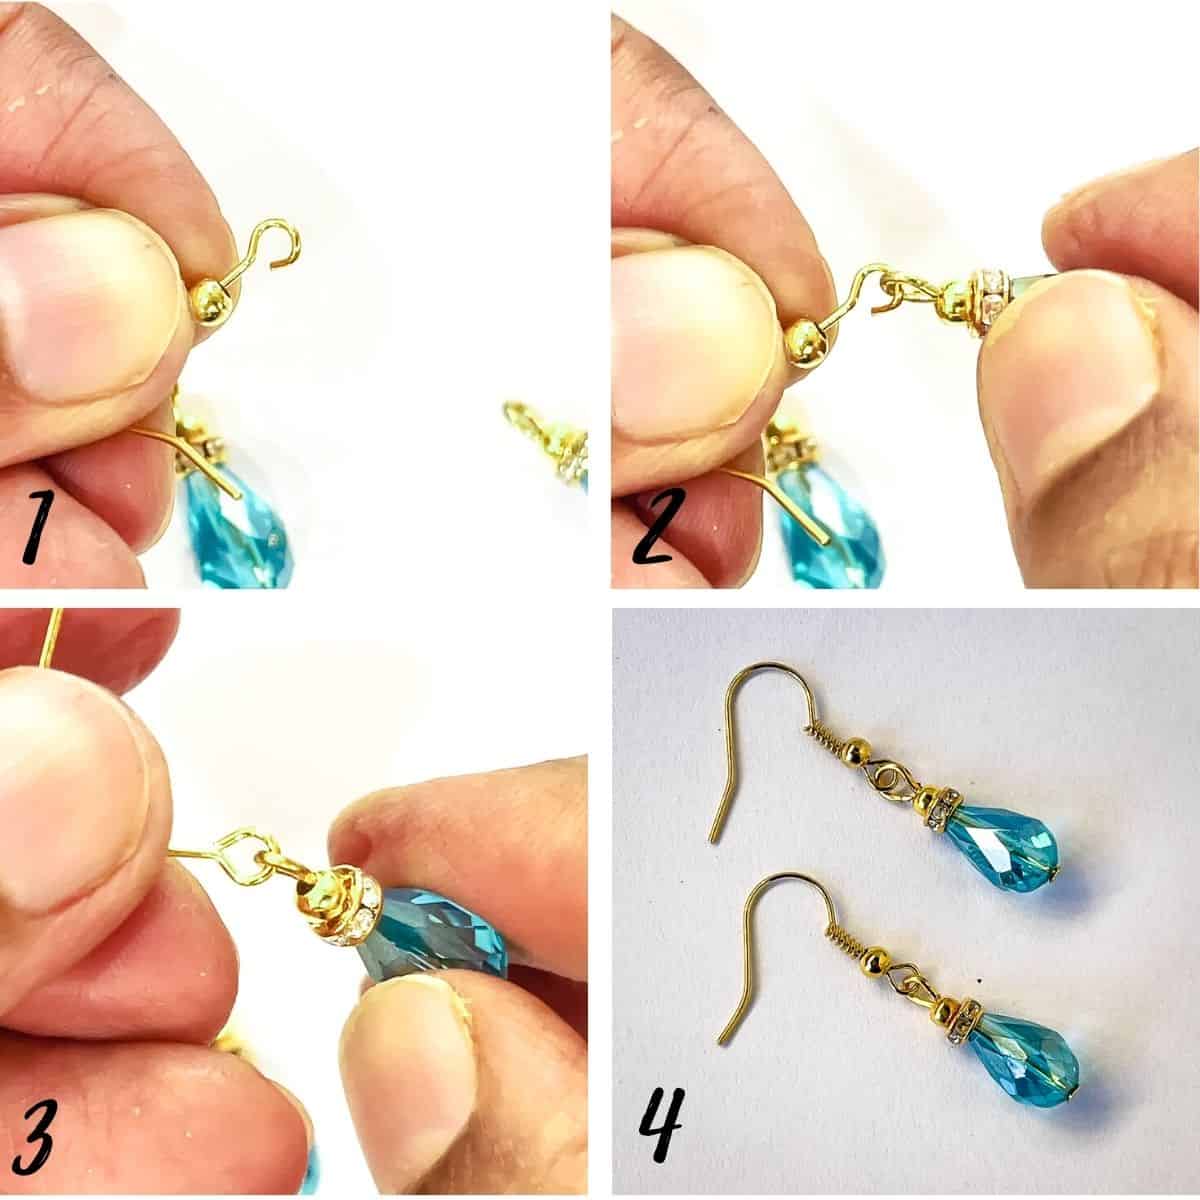 A poster of 4 images showing how to attached the teardrop bead dangle into an earring hook.